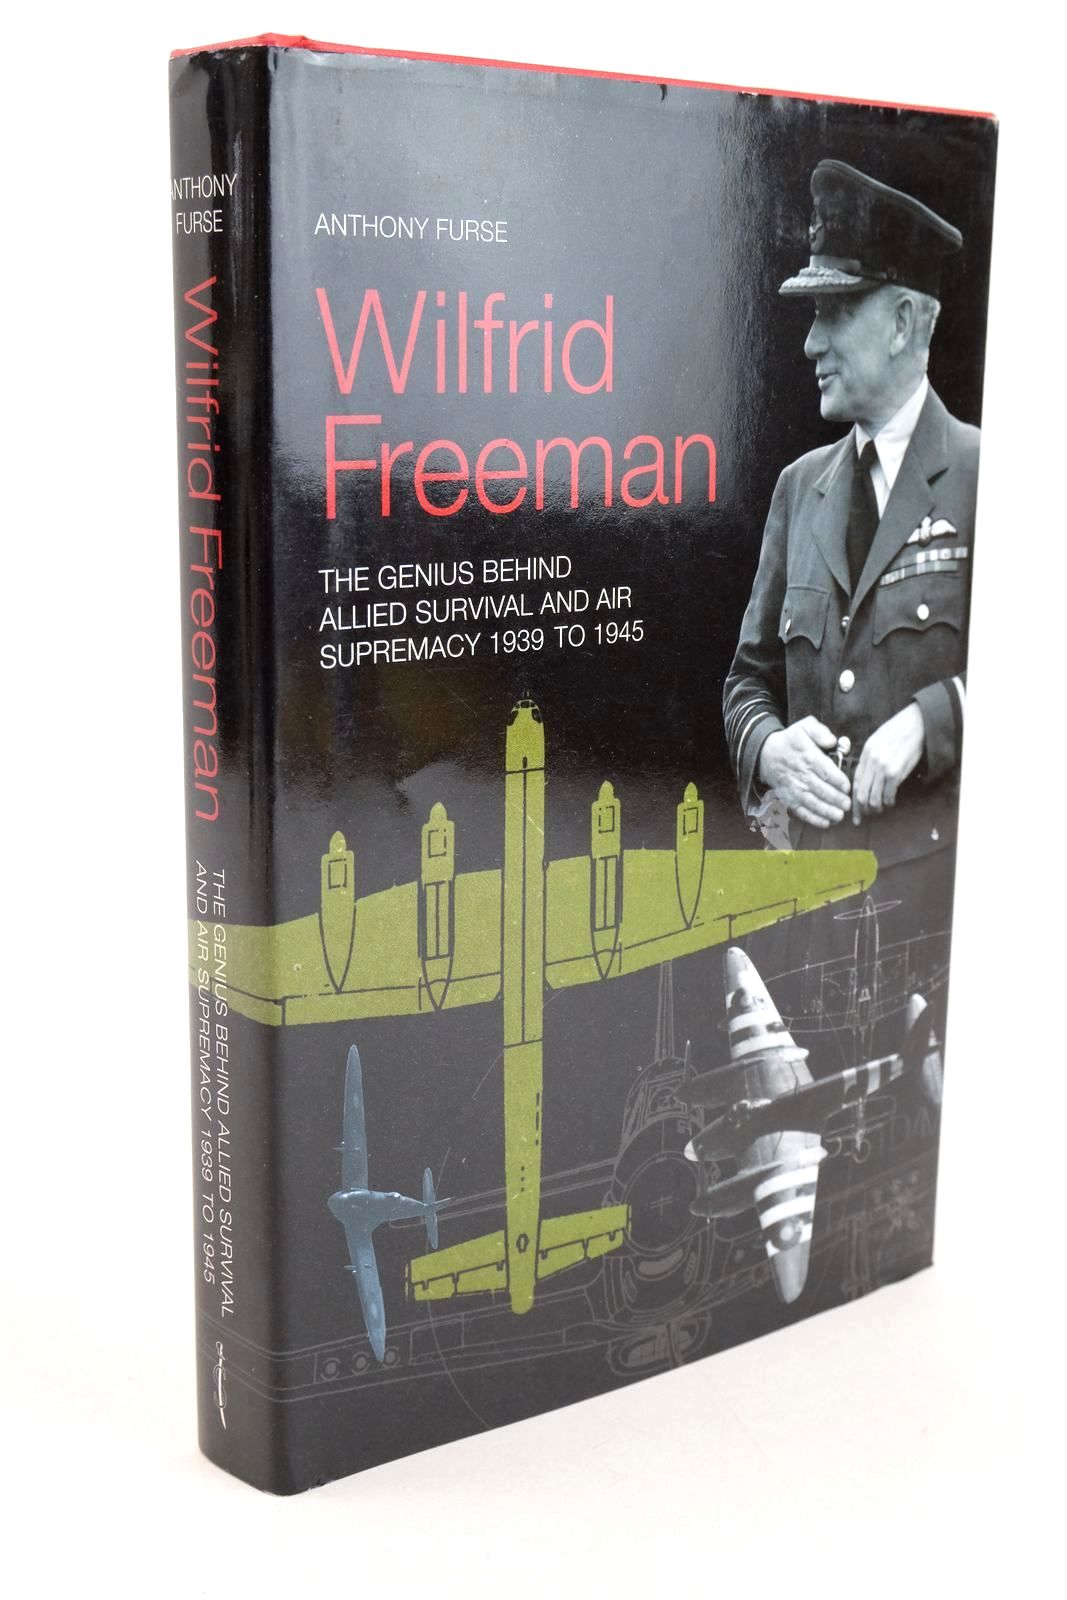 Photo of WILFRID FREEMAN written by Furse, Anthony published by Spellmount Ltd. (STOCK CODE: 1327810)  for sale by Stella & Rose's Books